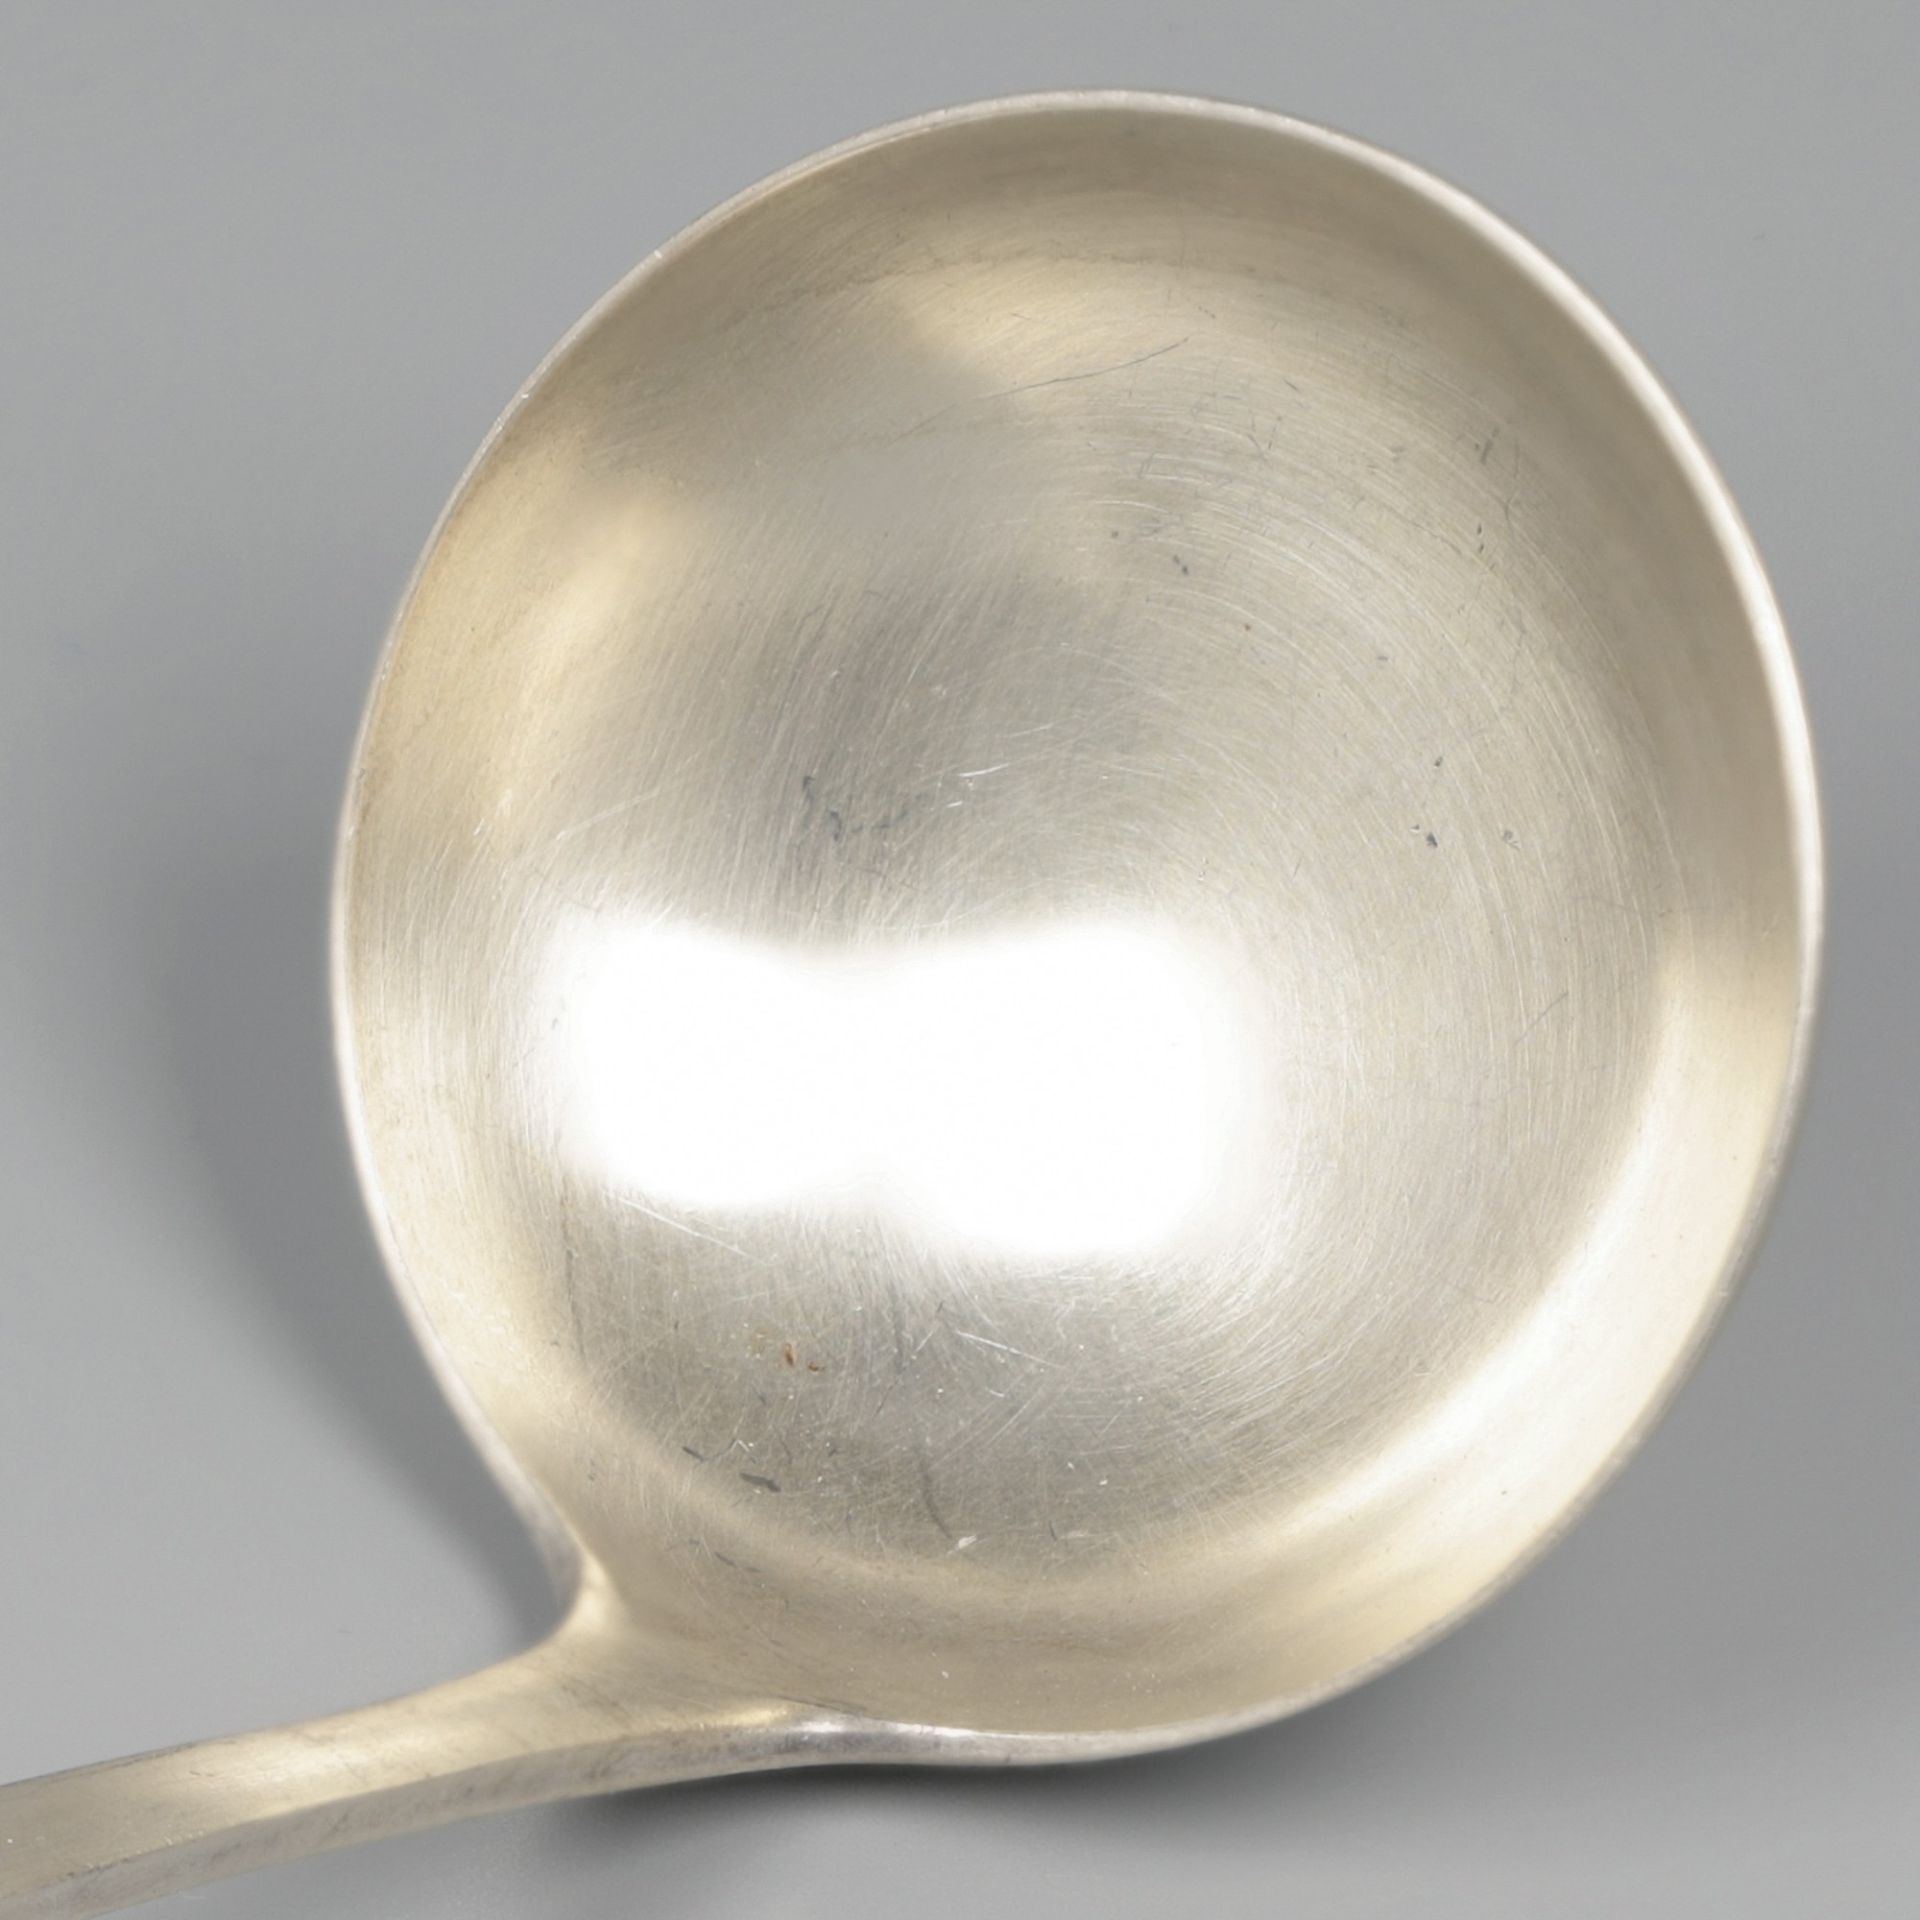 No reserve - Sauce serving spoon "Haags Lofje" silver. - Image 3 of 5